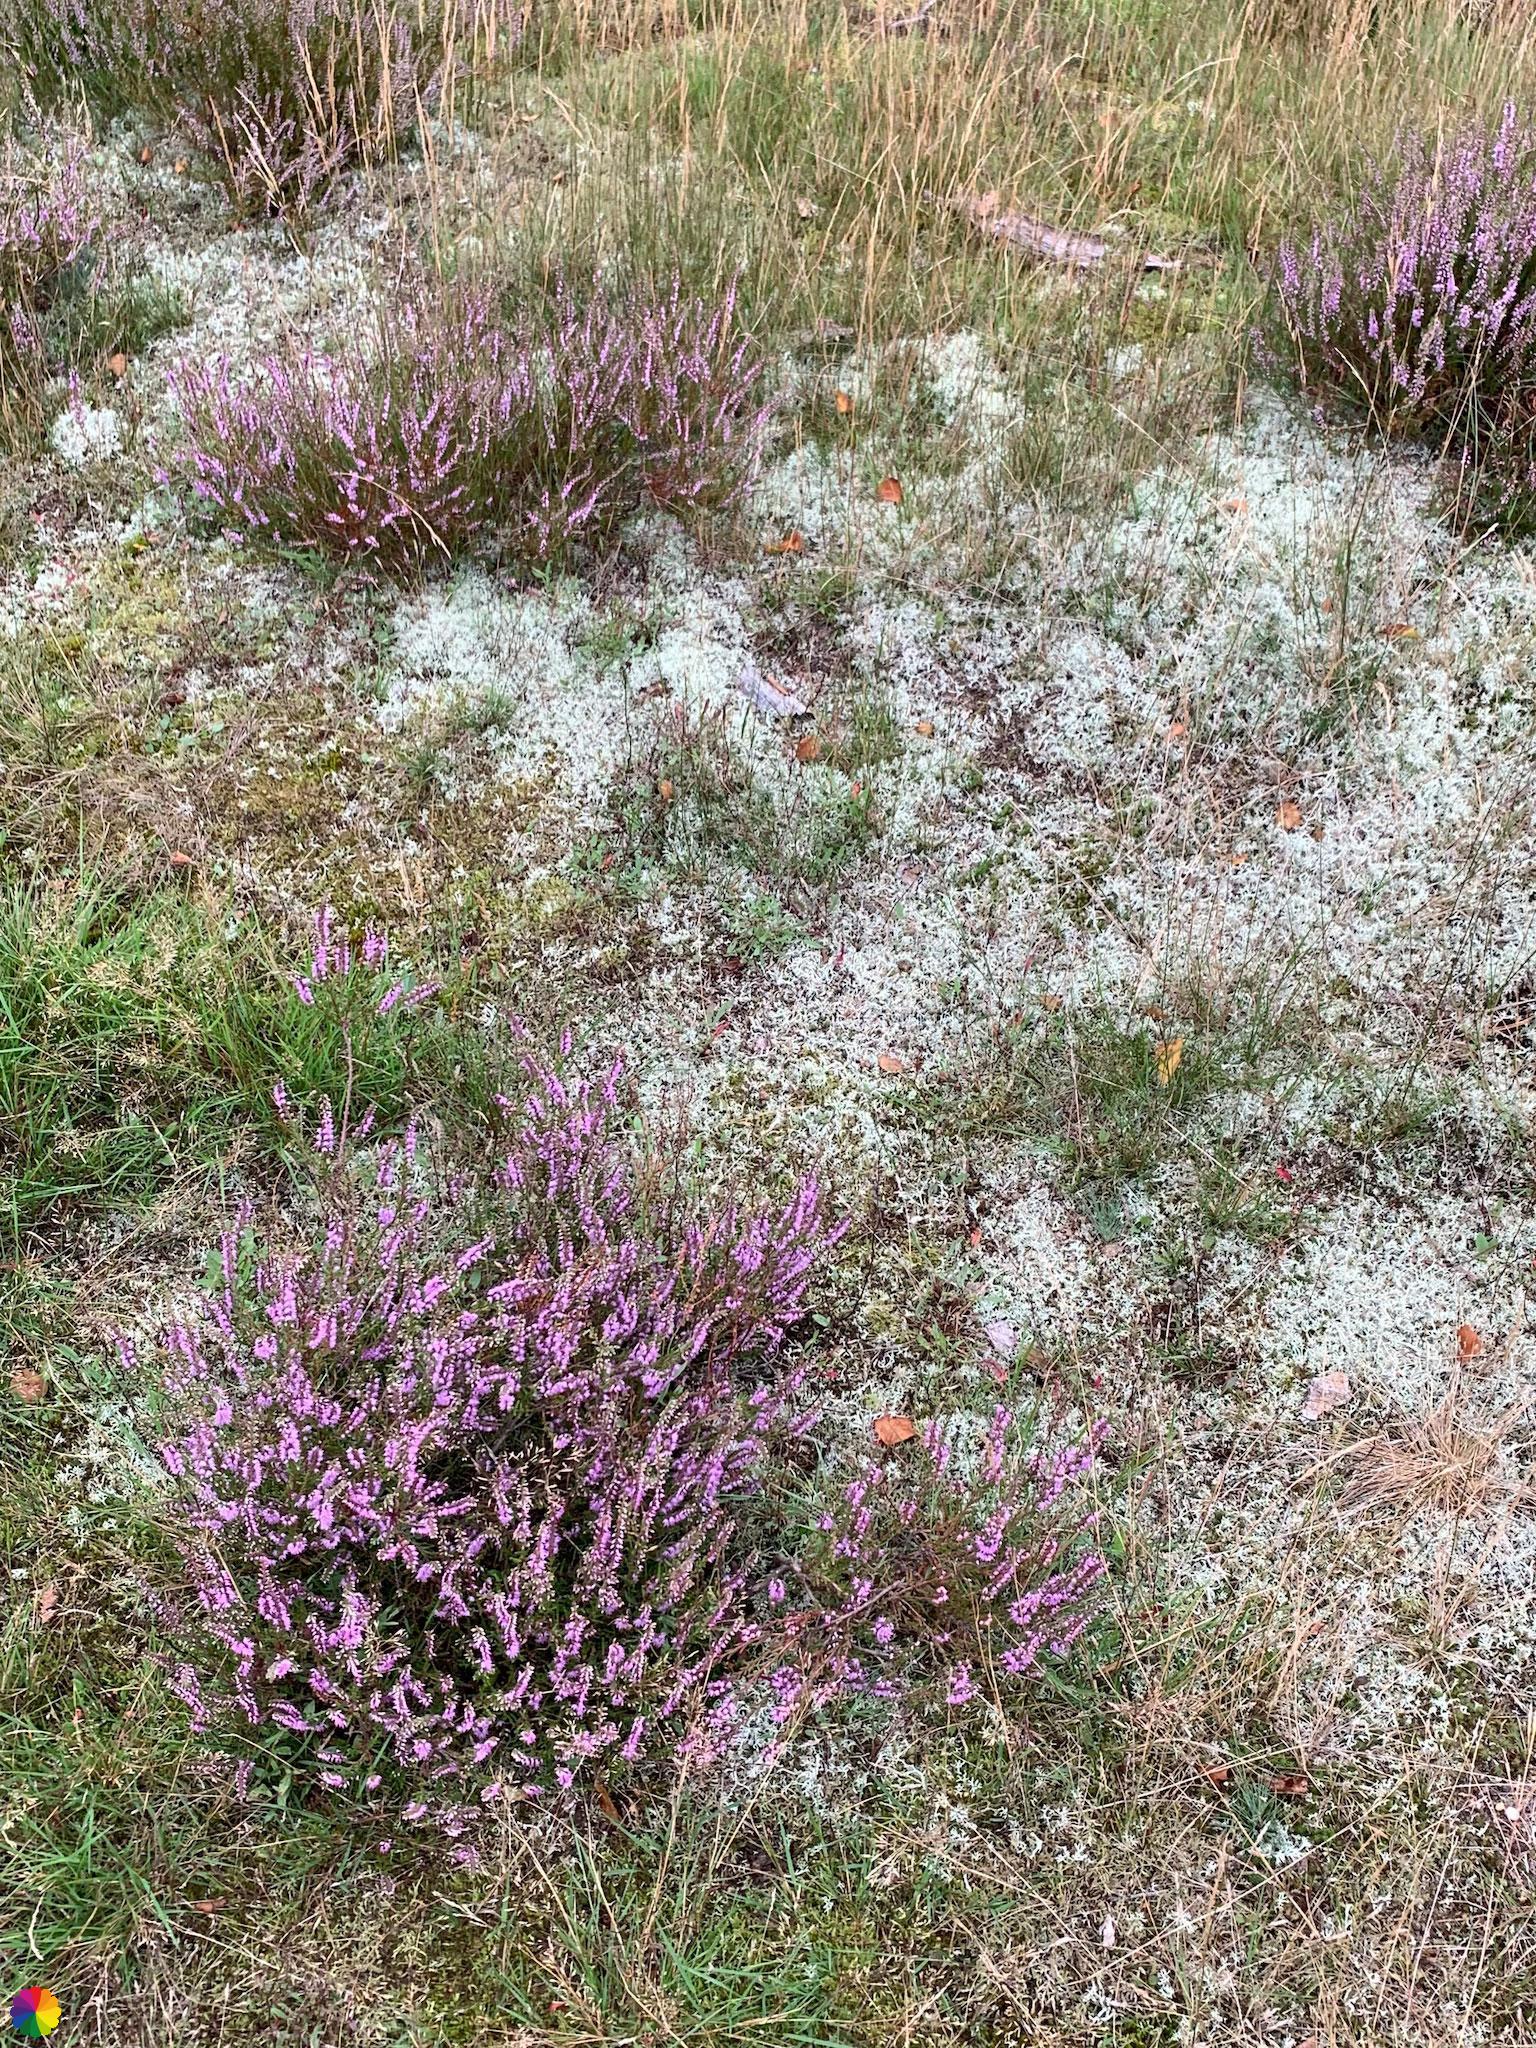 Heather shrub and moss at the Southern heatherlands